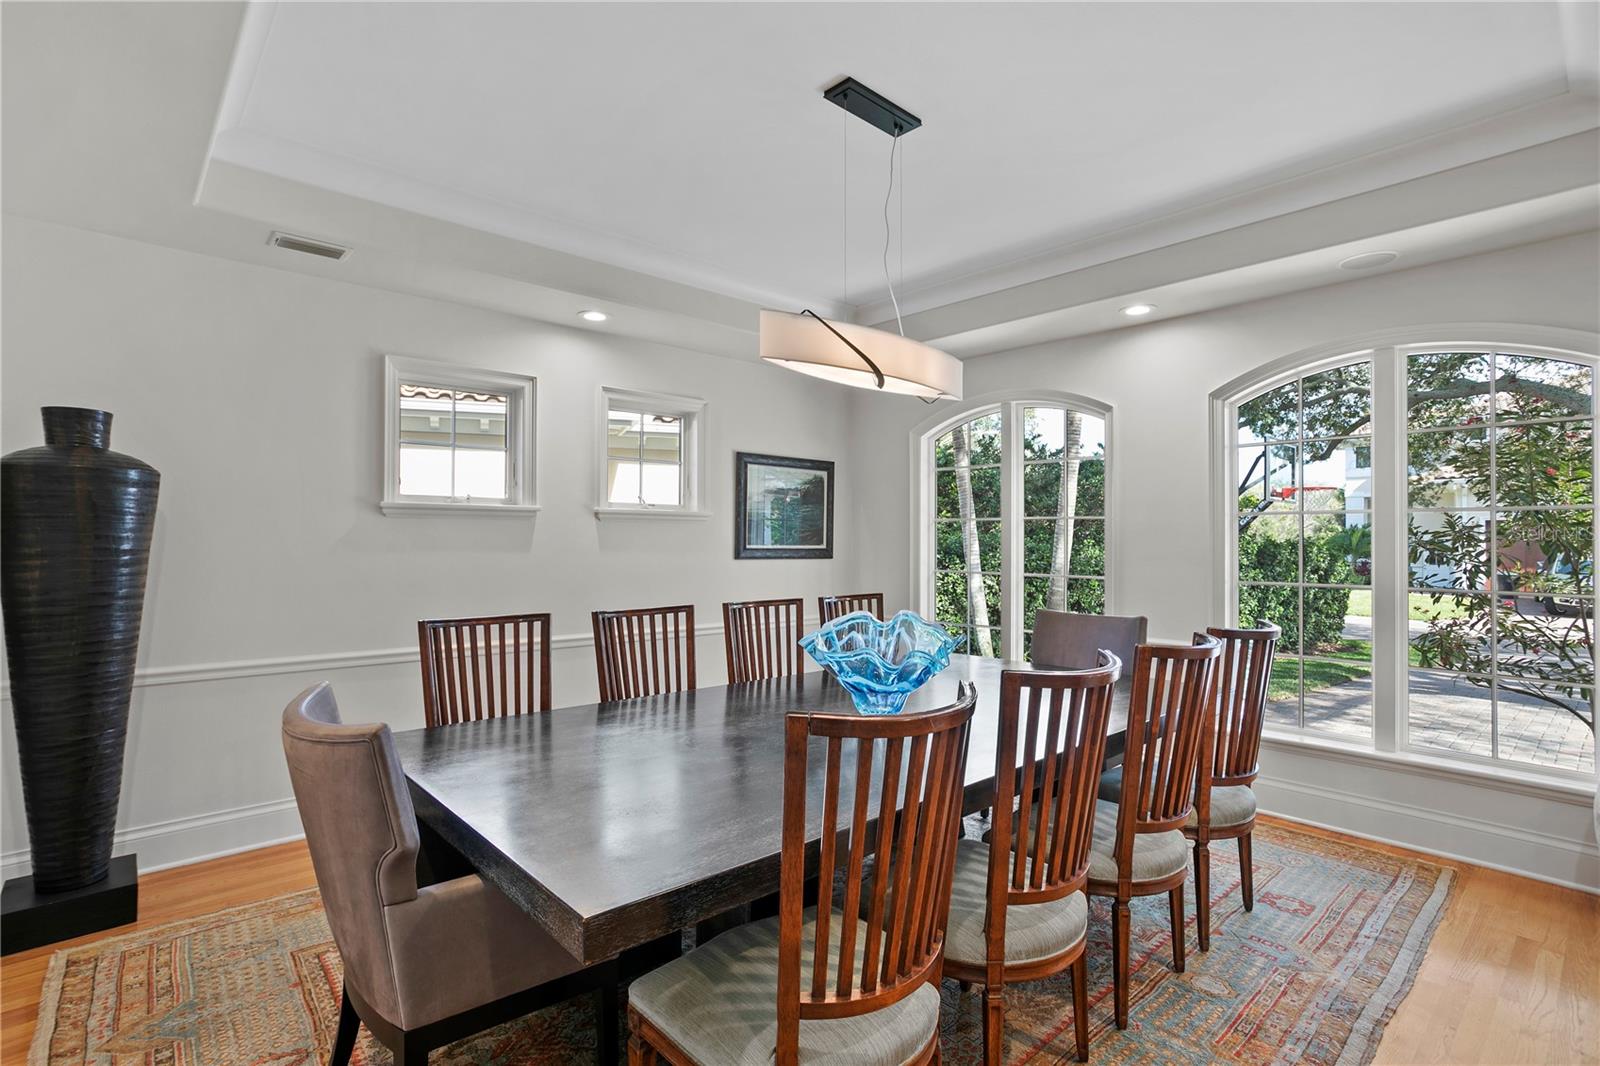 The dining room has plenty of natural light with space for dining and entertaining.